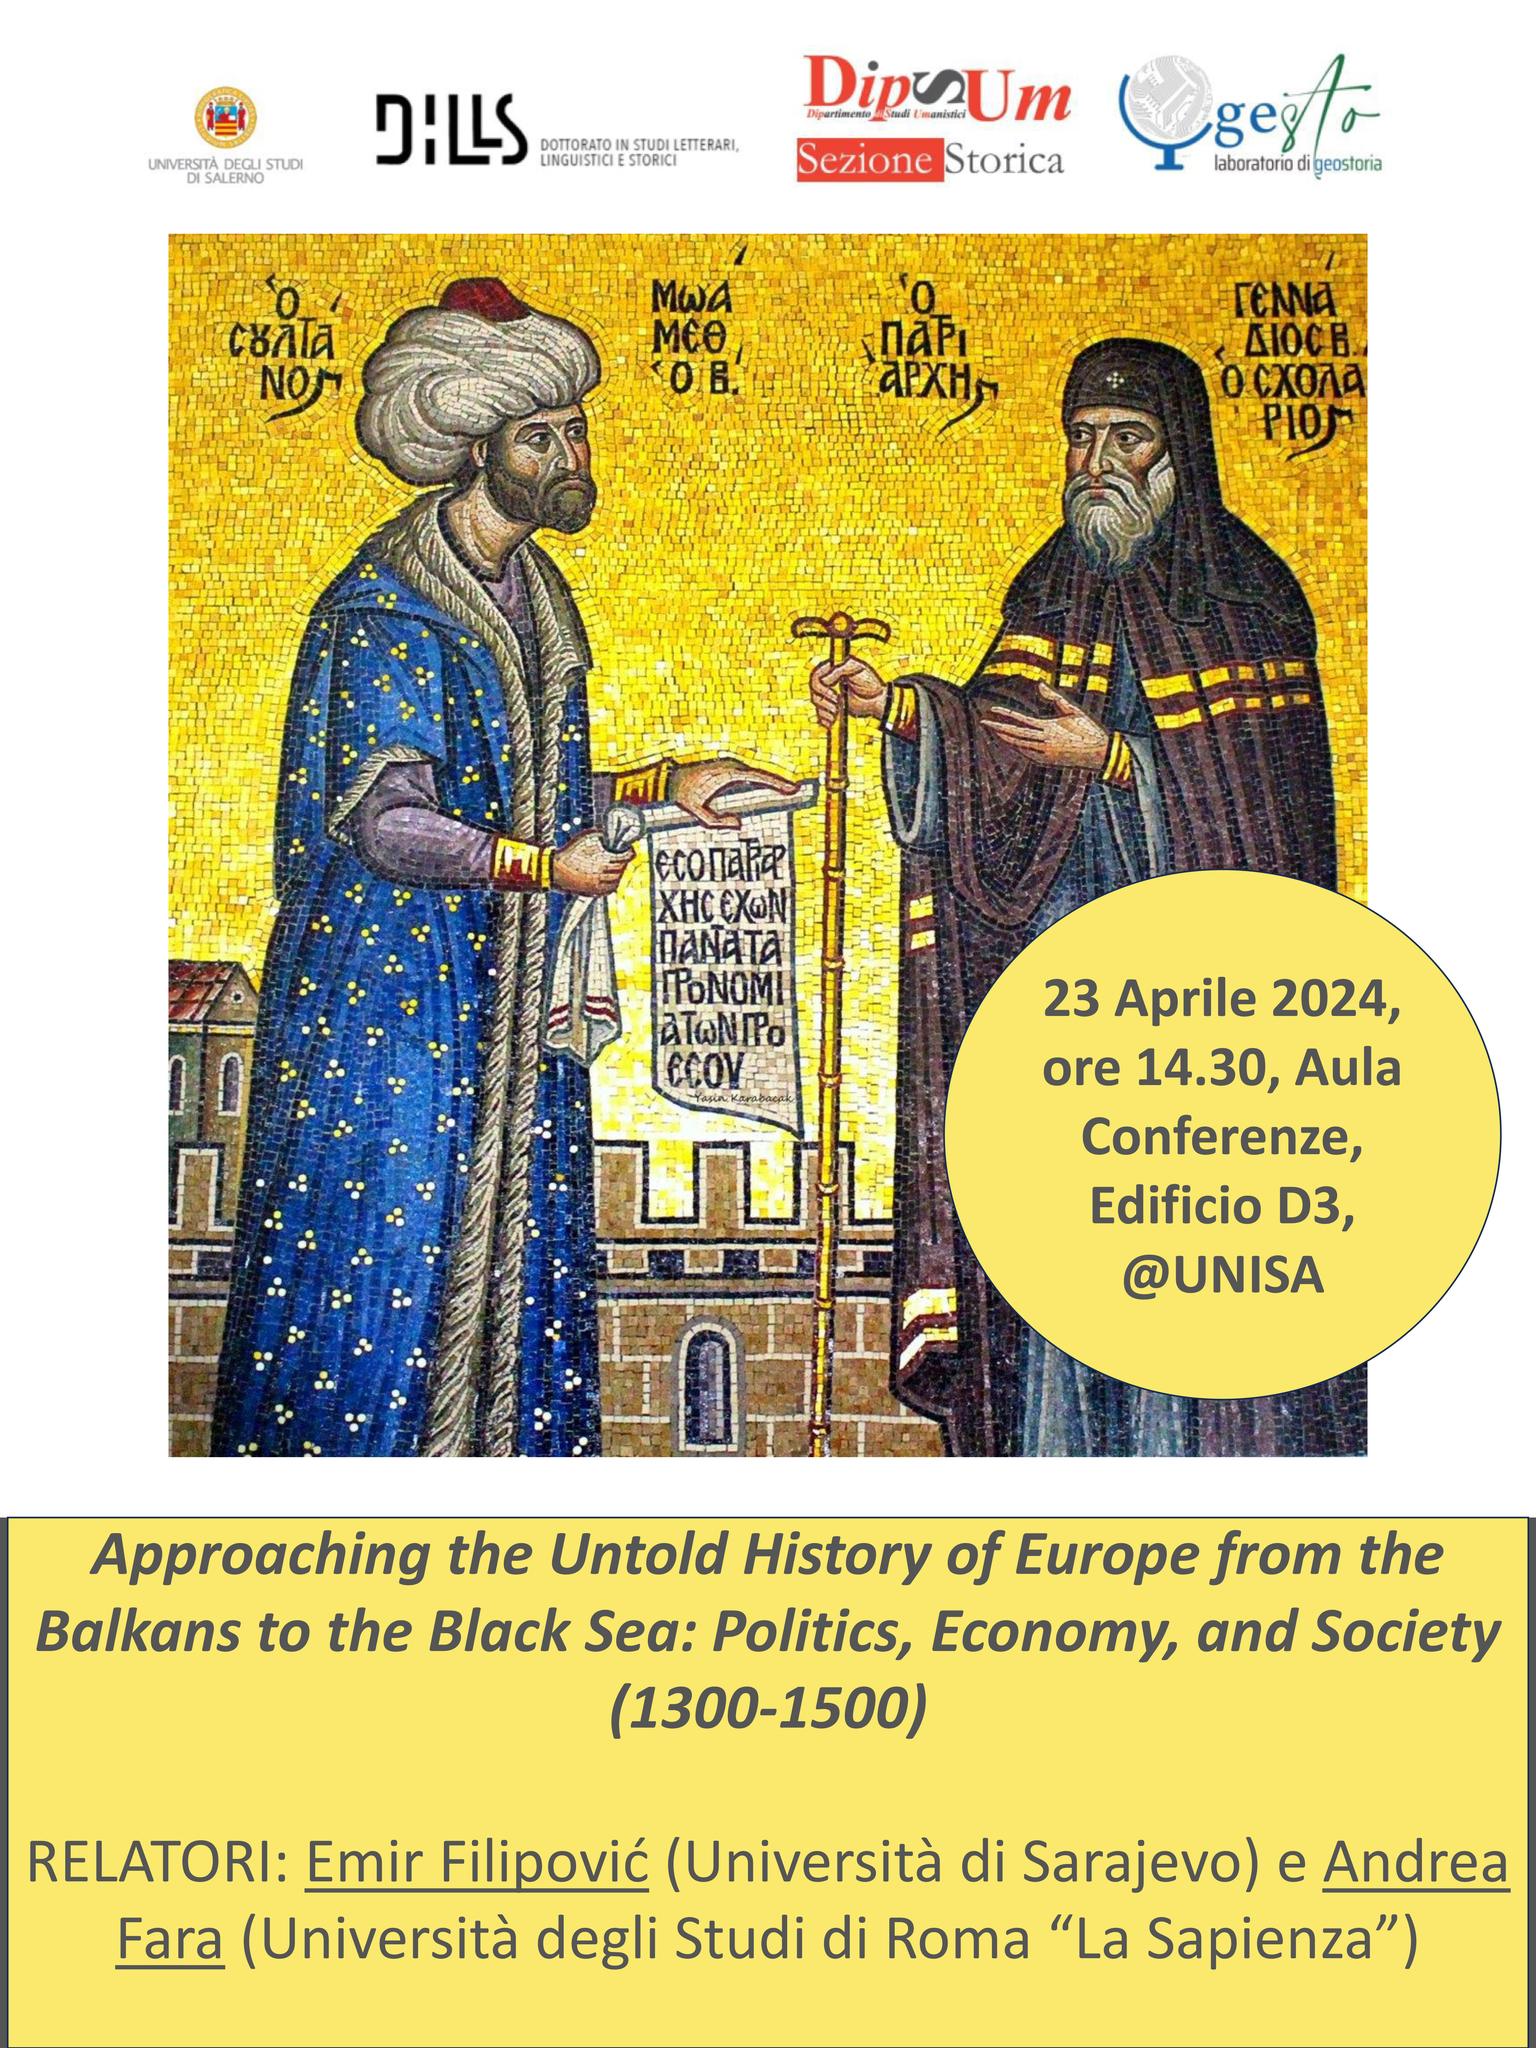 Approaching the Untold History of Europe from the Balkans to the Black Sea: Politics, Economy, and Society (1300-1500)